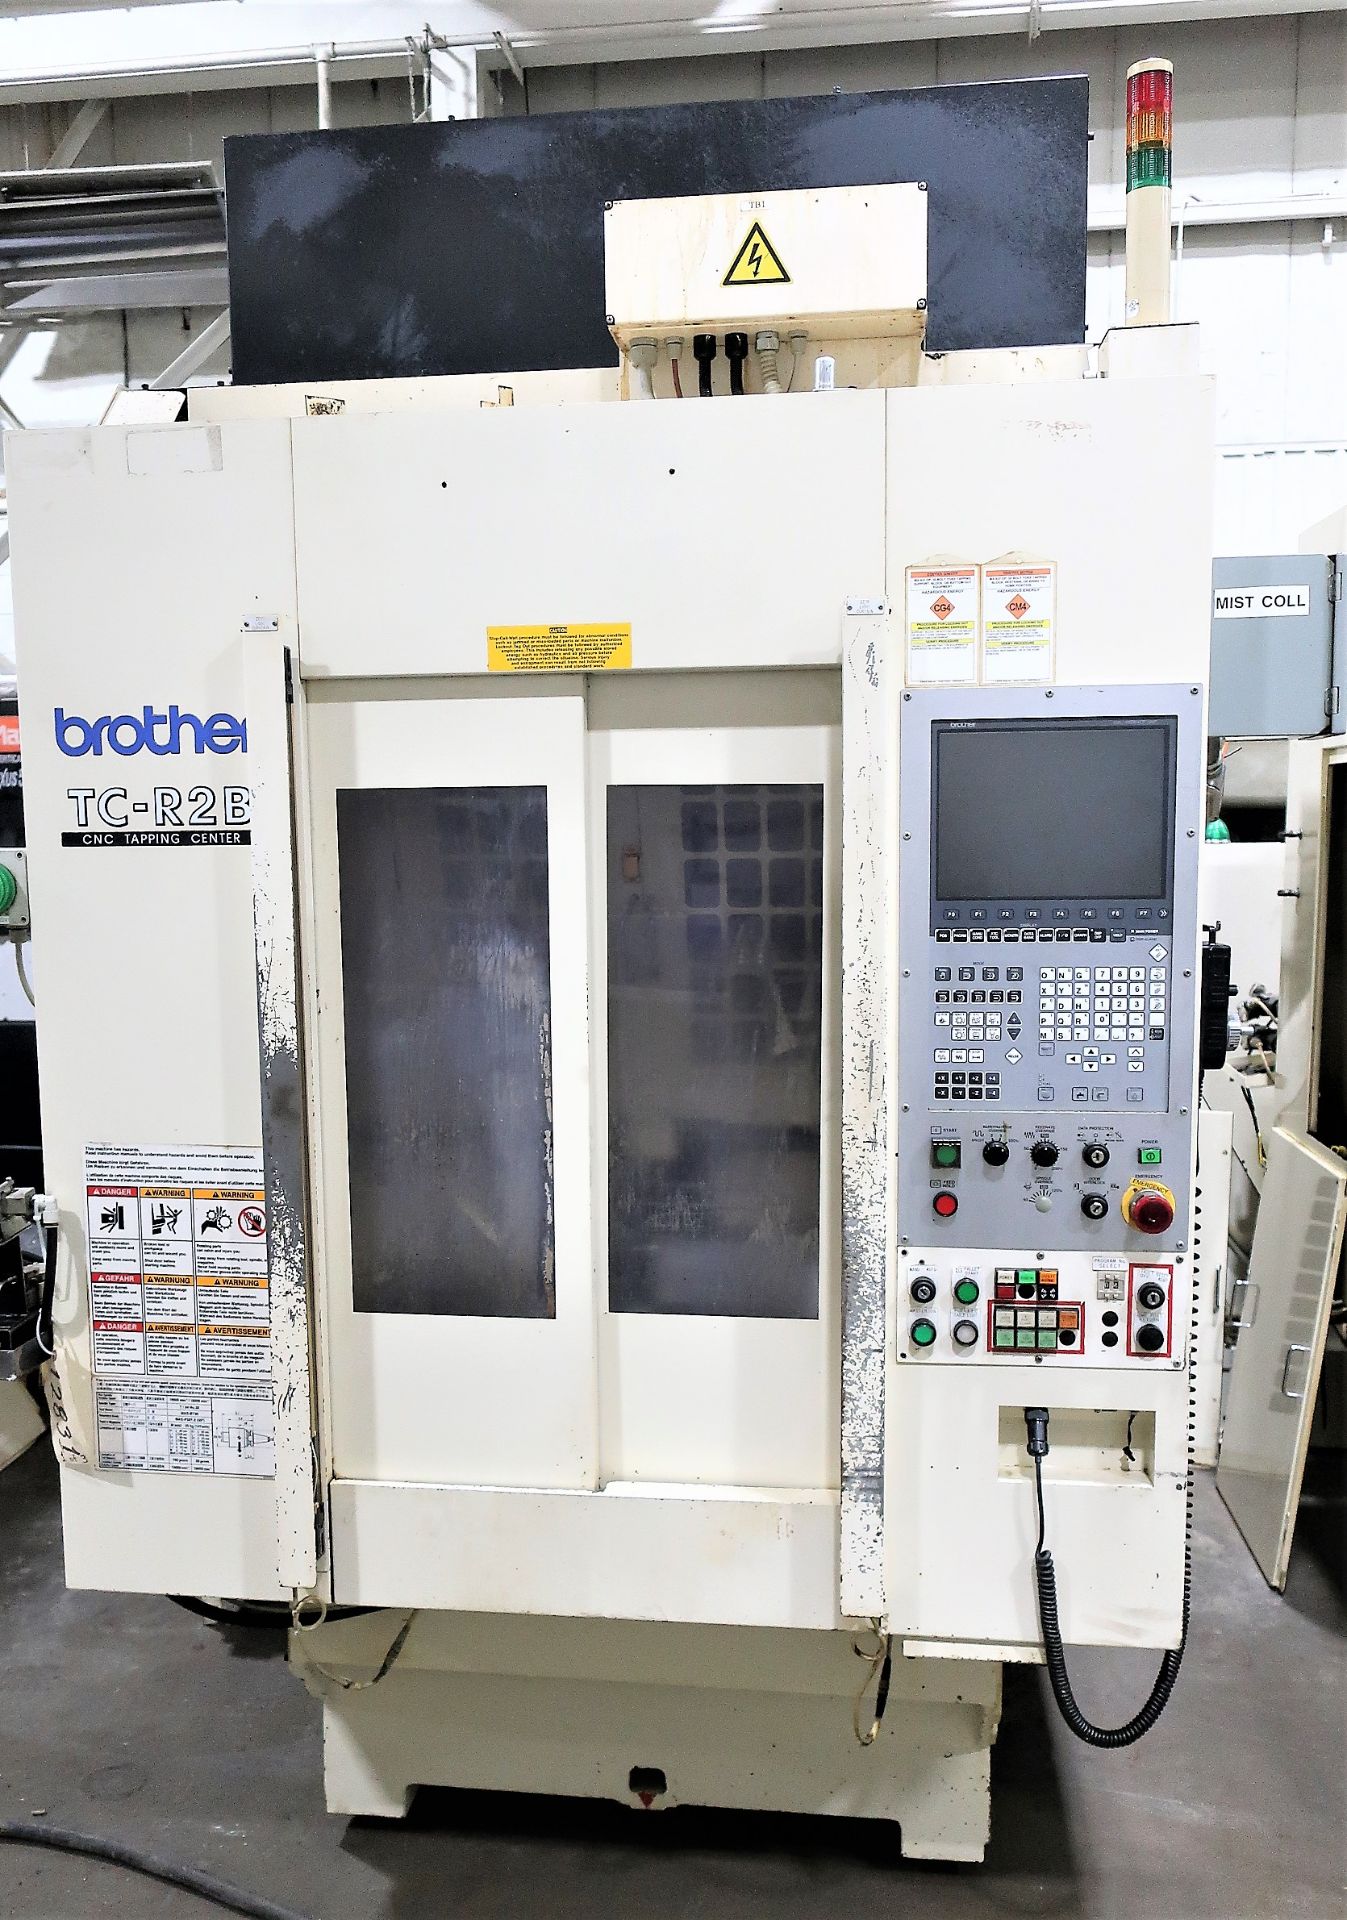 BROTHER TC-R2B CNC DRILL TAP VERTICAL MACHINING CENTER, S/N 111879, NEW 2012